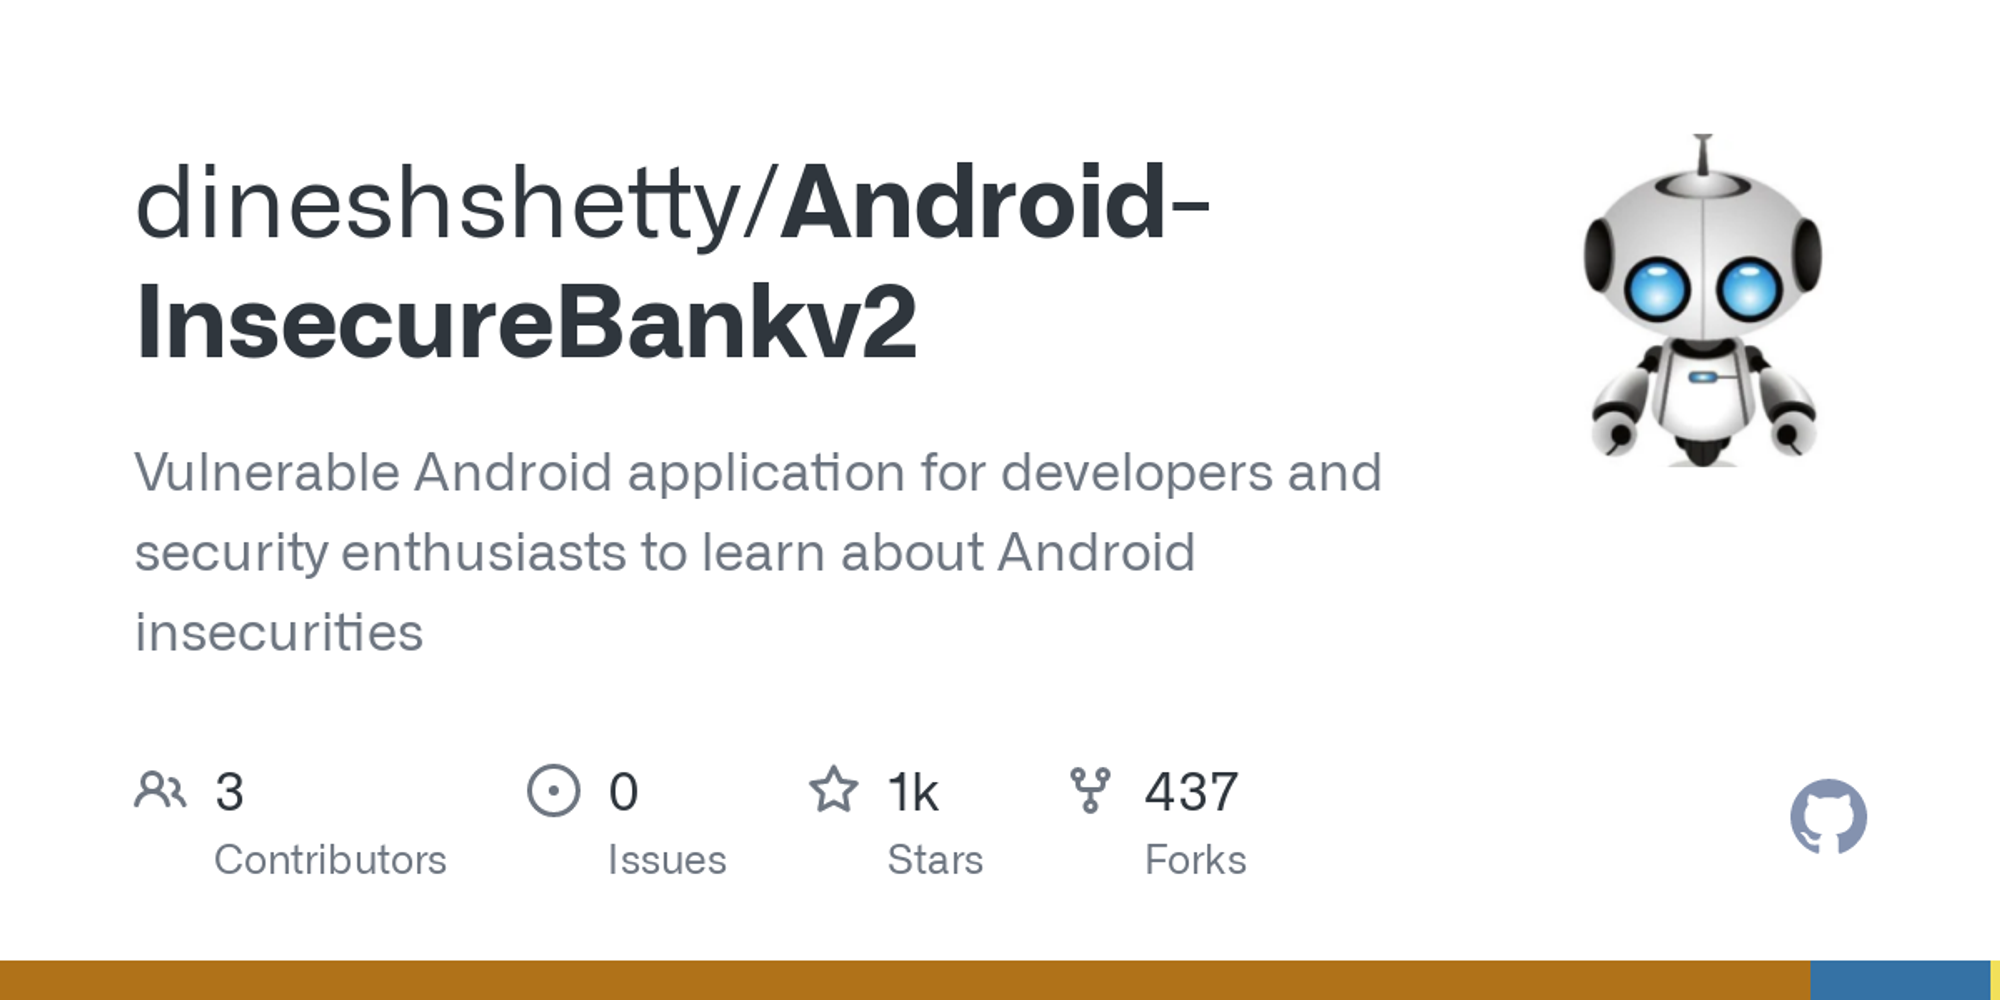 GitHub - dineshshetty/Android-InsecureBankv2: Vulnerable Android application for developers and security enthusiasts to learn about Android insecurities